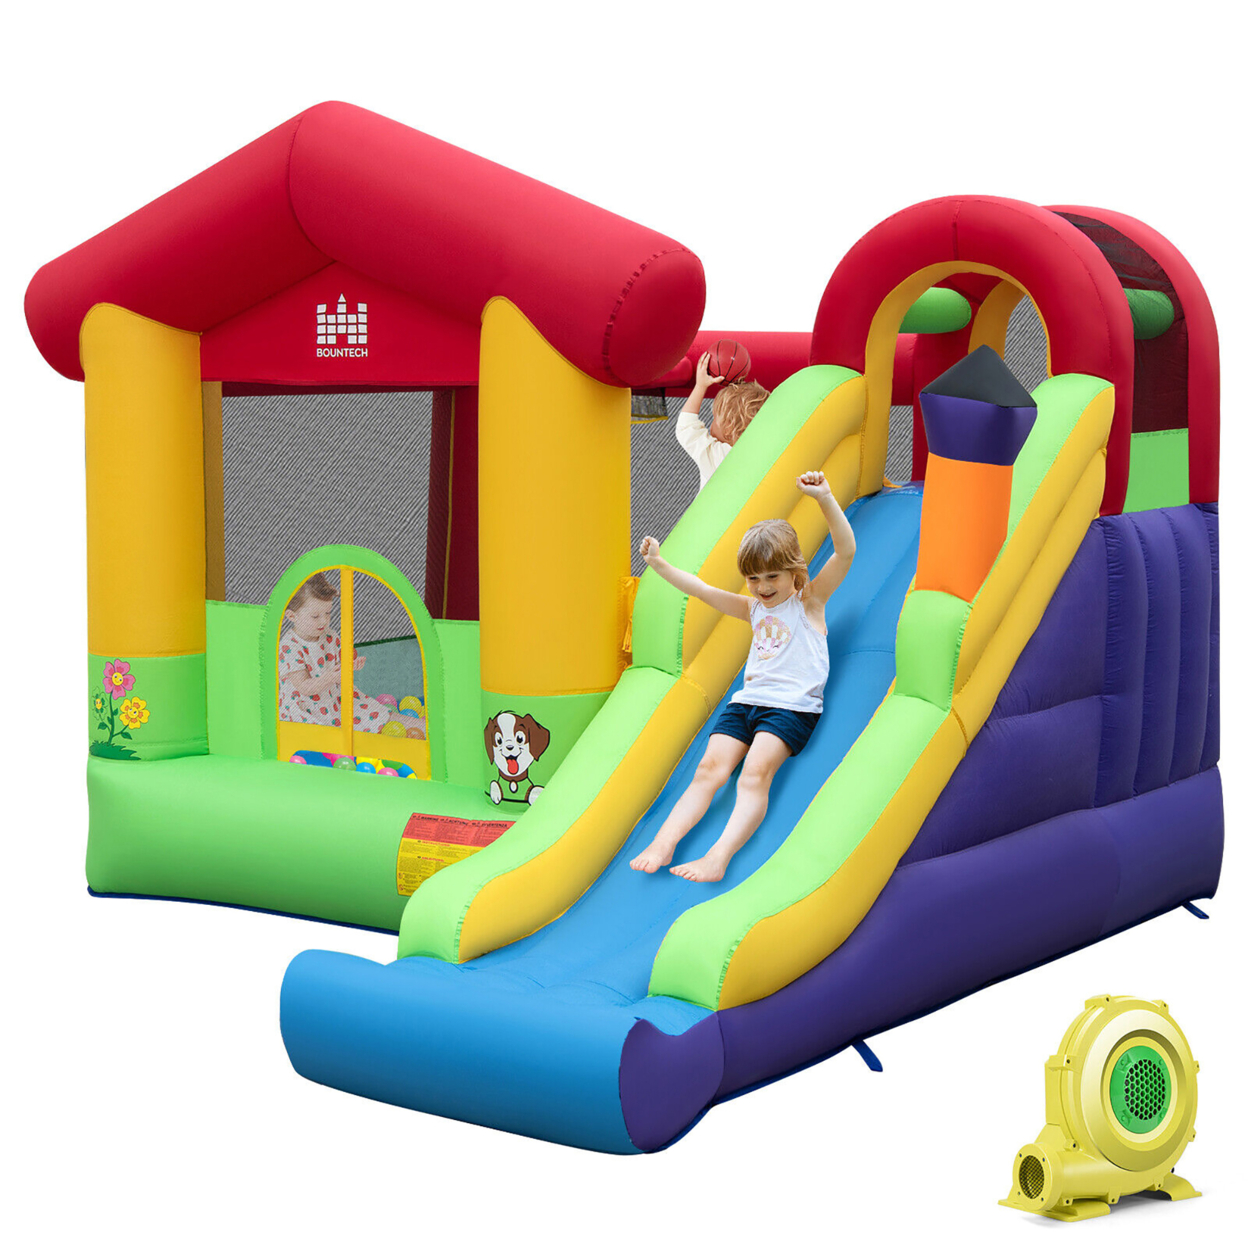 Inflatable Bounce Castle Kids Jumping House W/ Ocean Balls & 735W Air Blower